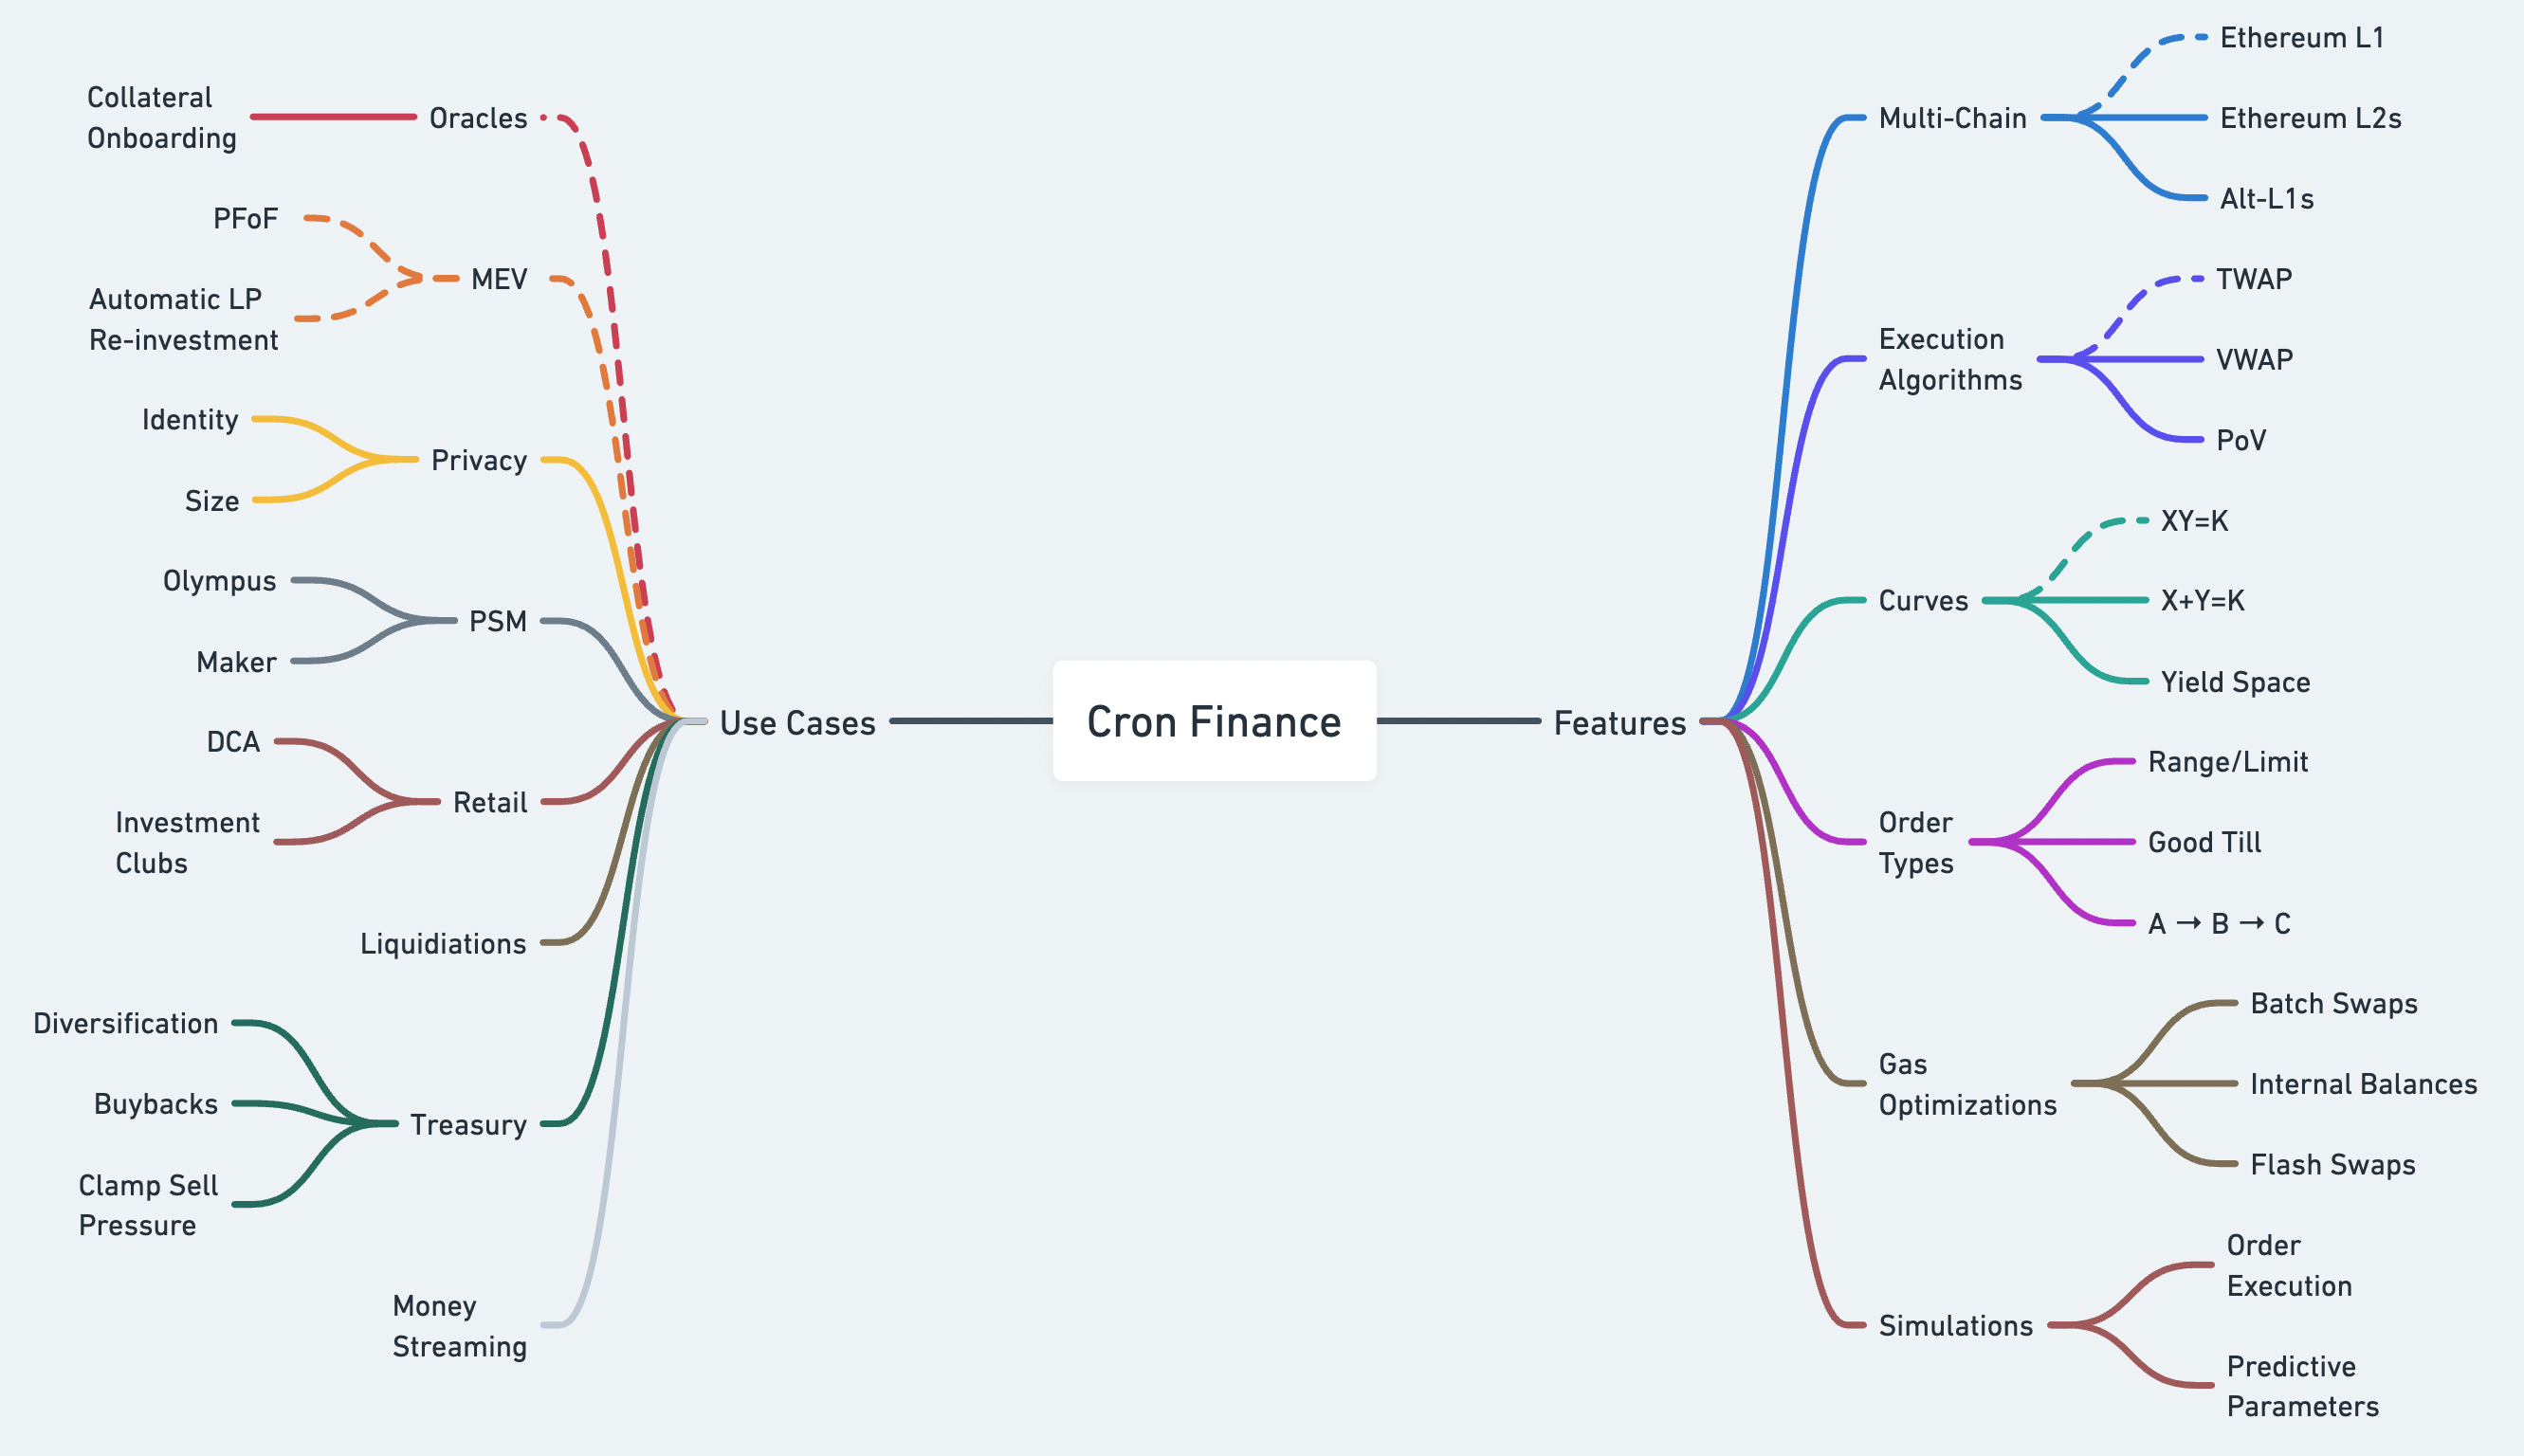 Features implemented in dashed lines, and solid lines indicate potential future use cases and features